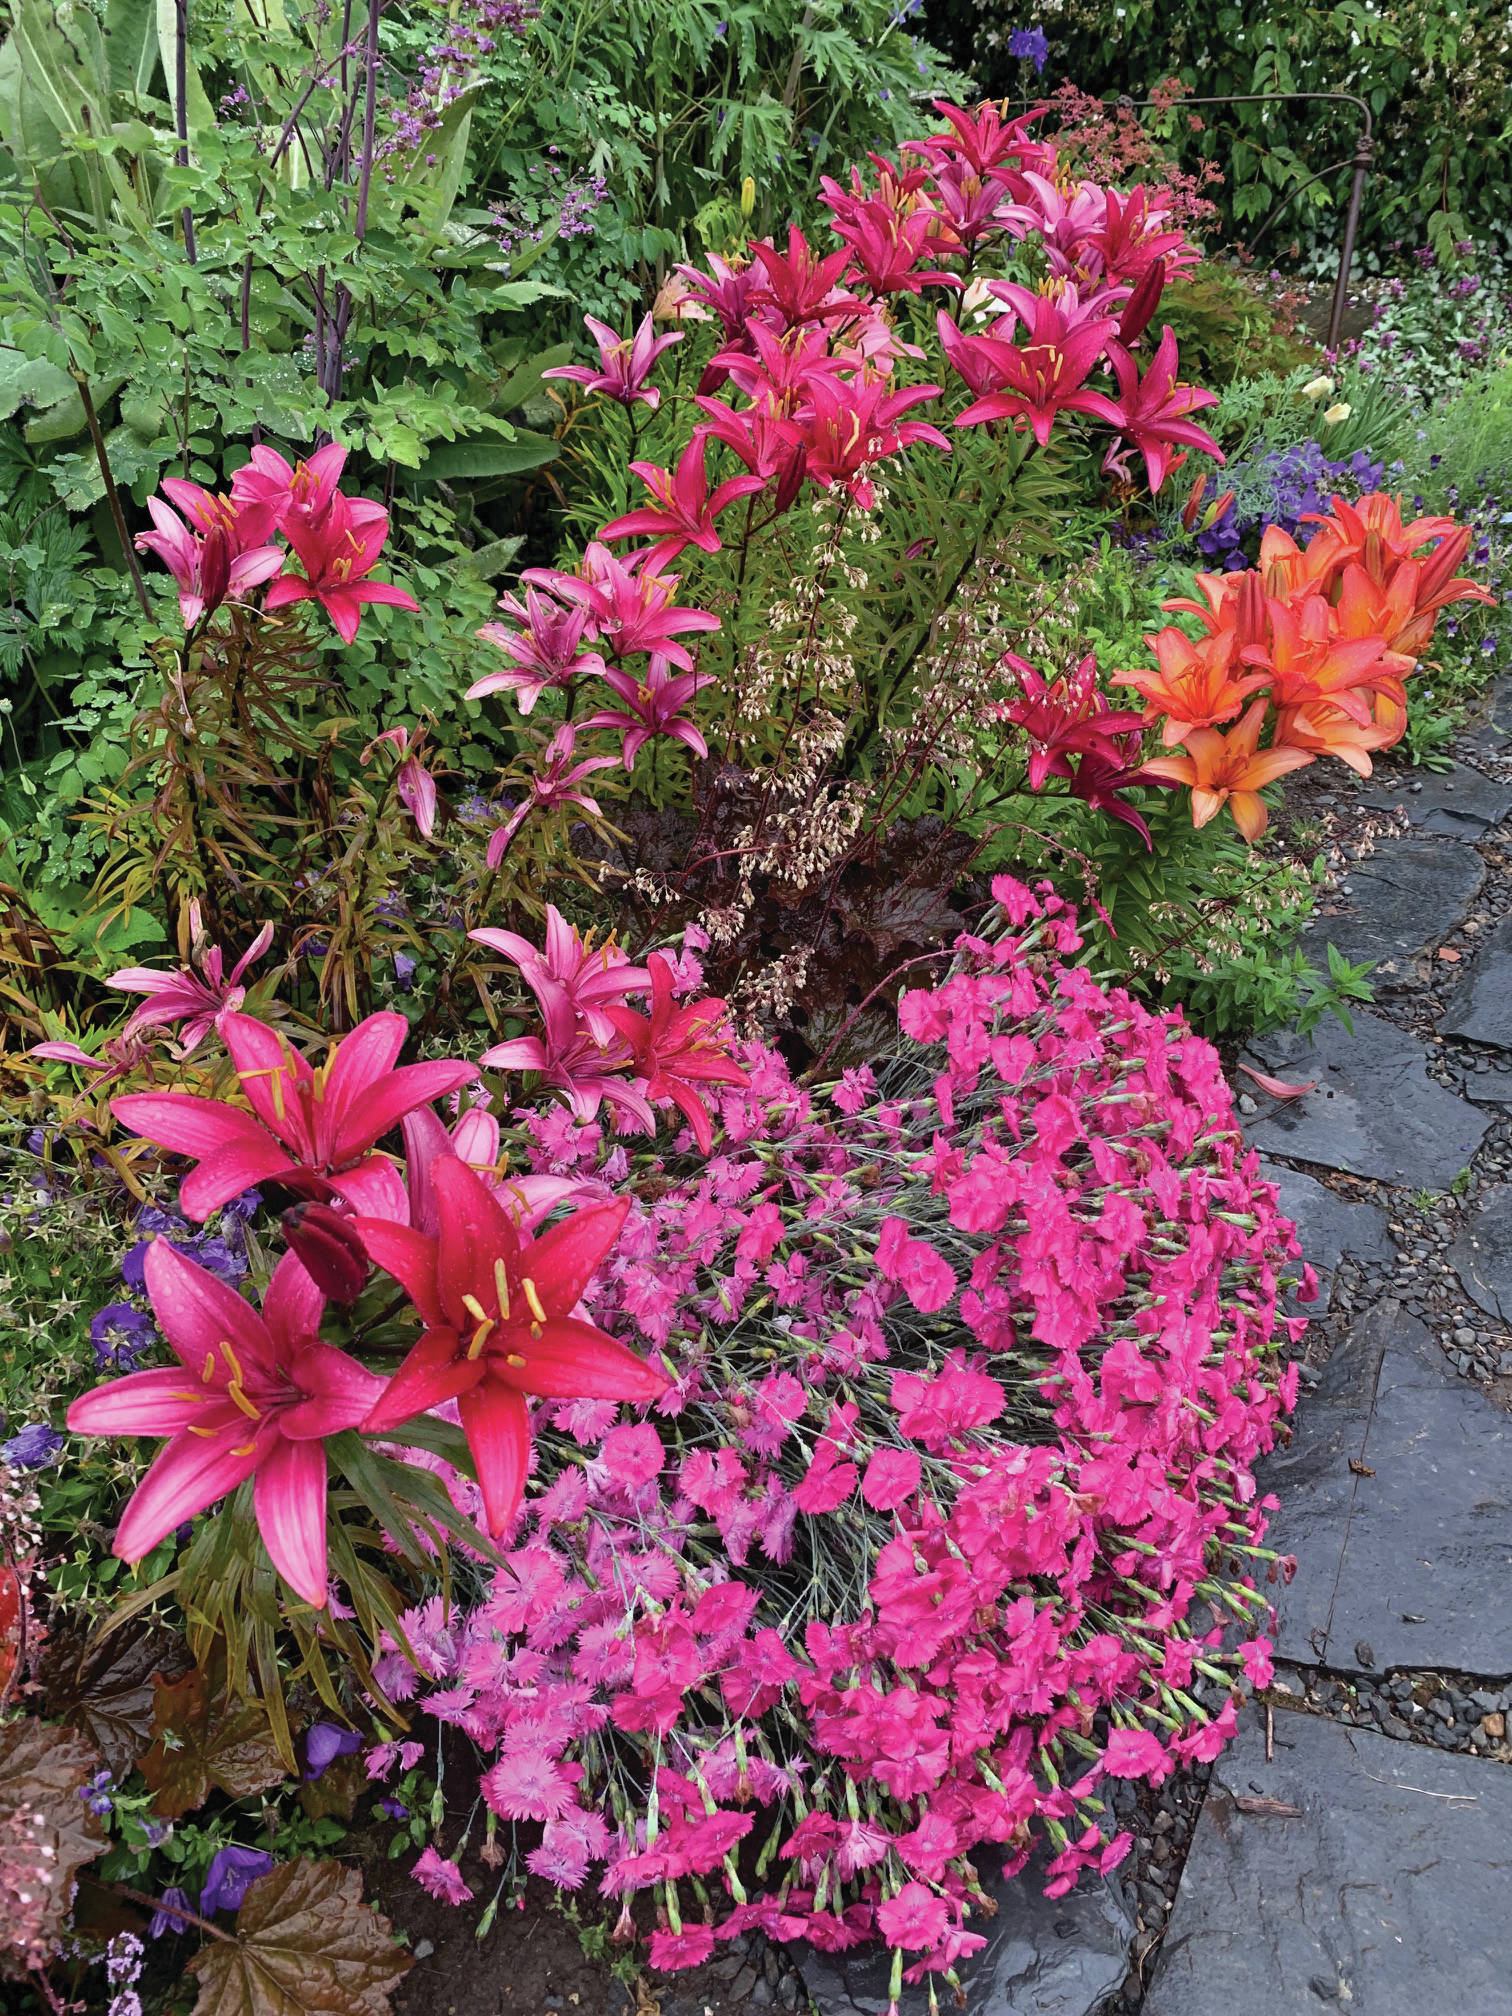 Cottage pinks, asiatic lilies, heuchera, thalictrum, all happily cohabitate in a very unplanned perennial bed at the Kachemak Gardener’s garden in this photo taken on July 28, 2019, in Homer, Alaska. (Photo by Rosemary Fitzpatrick)